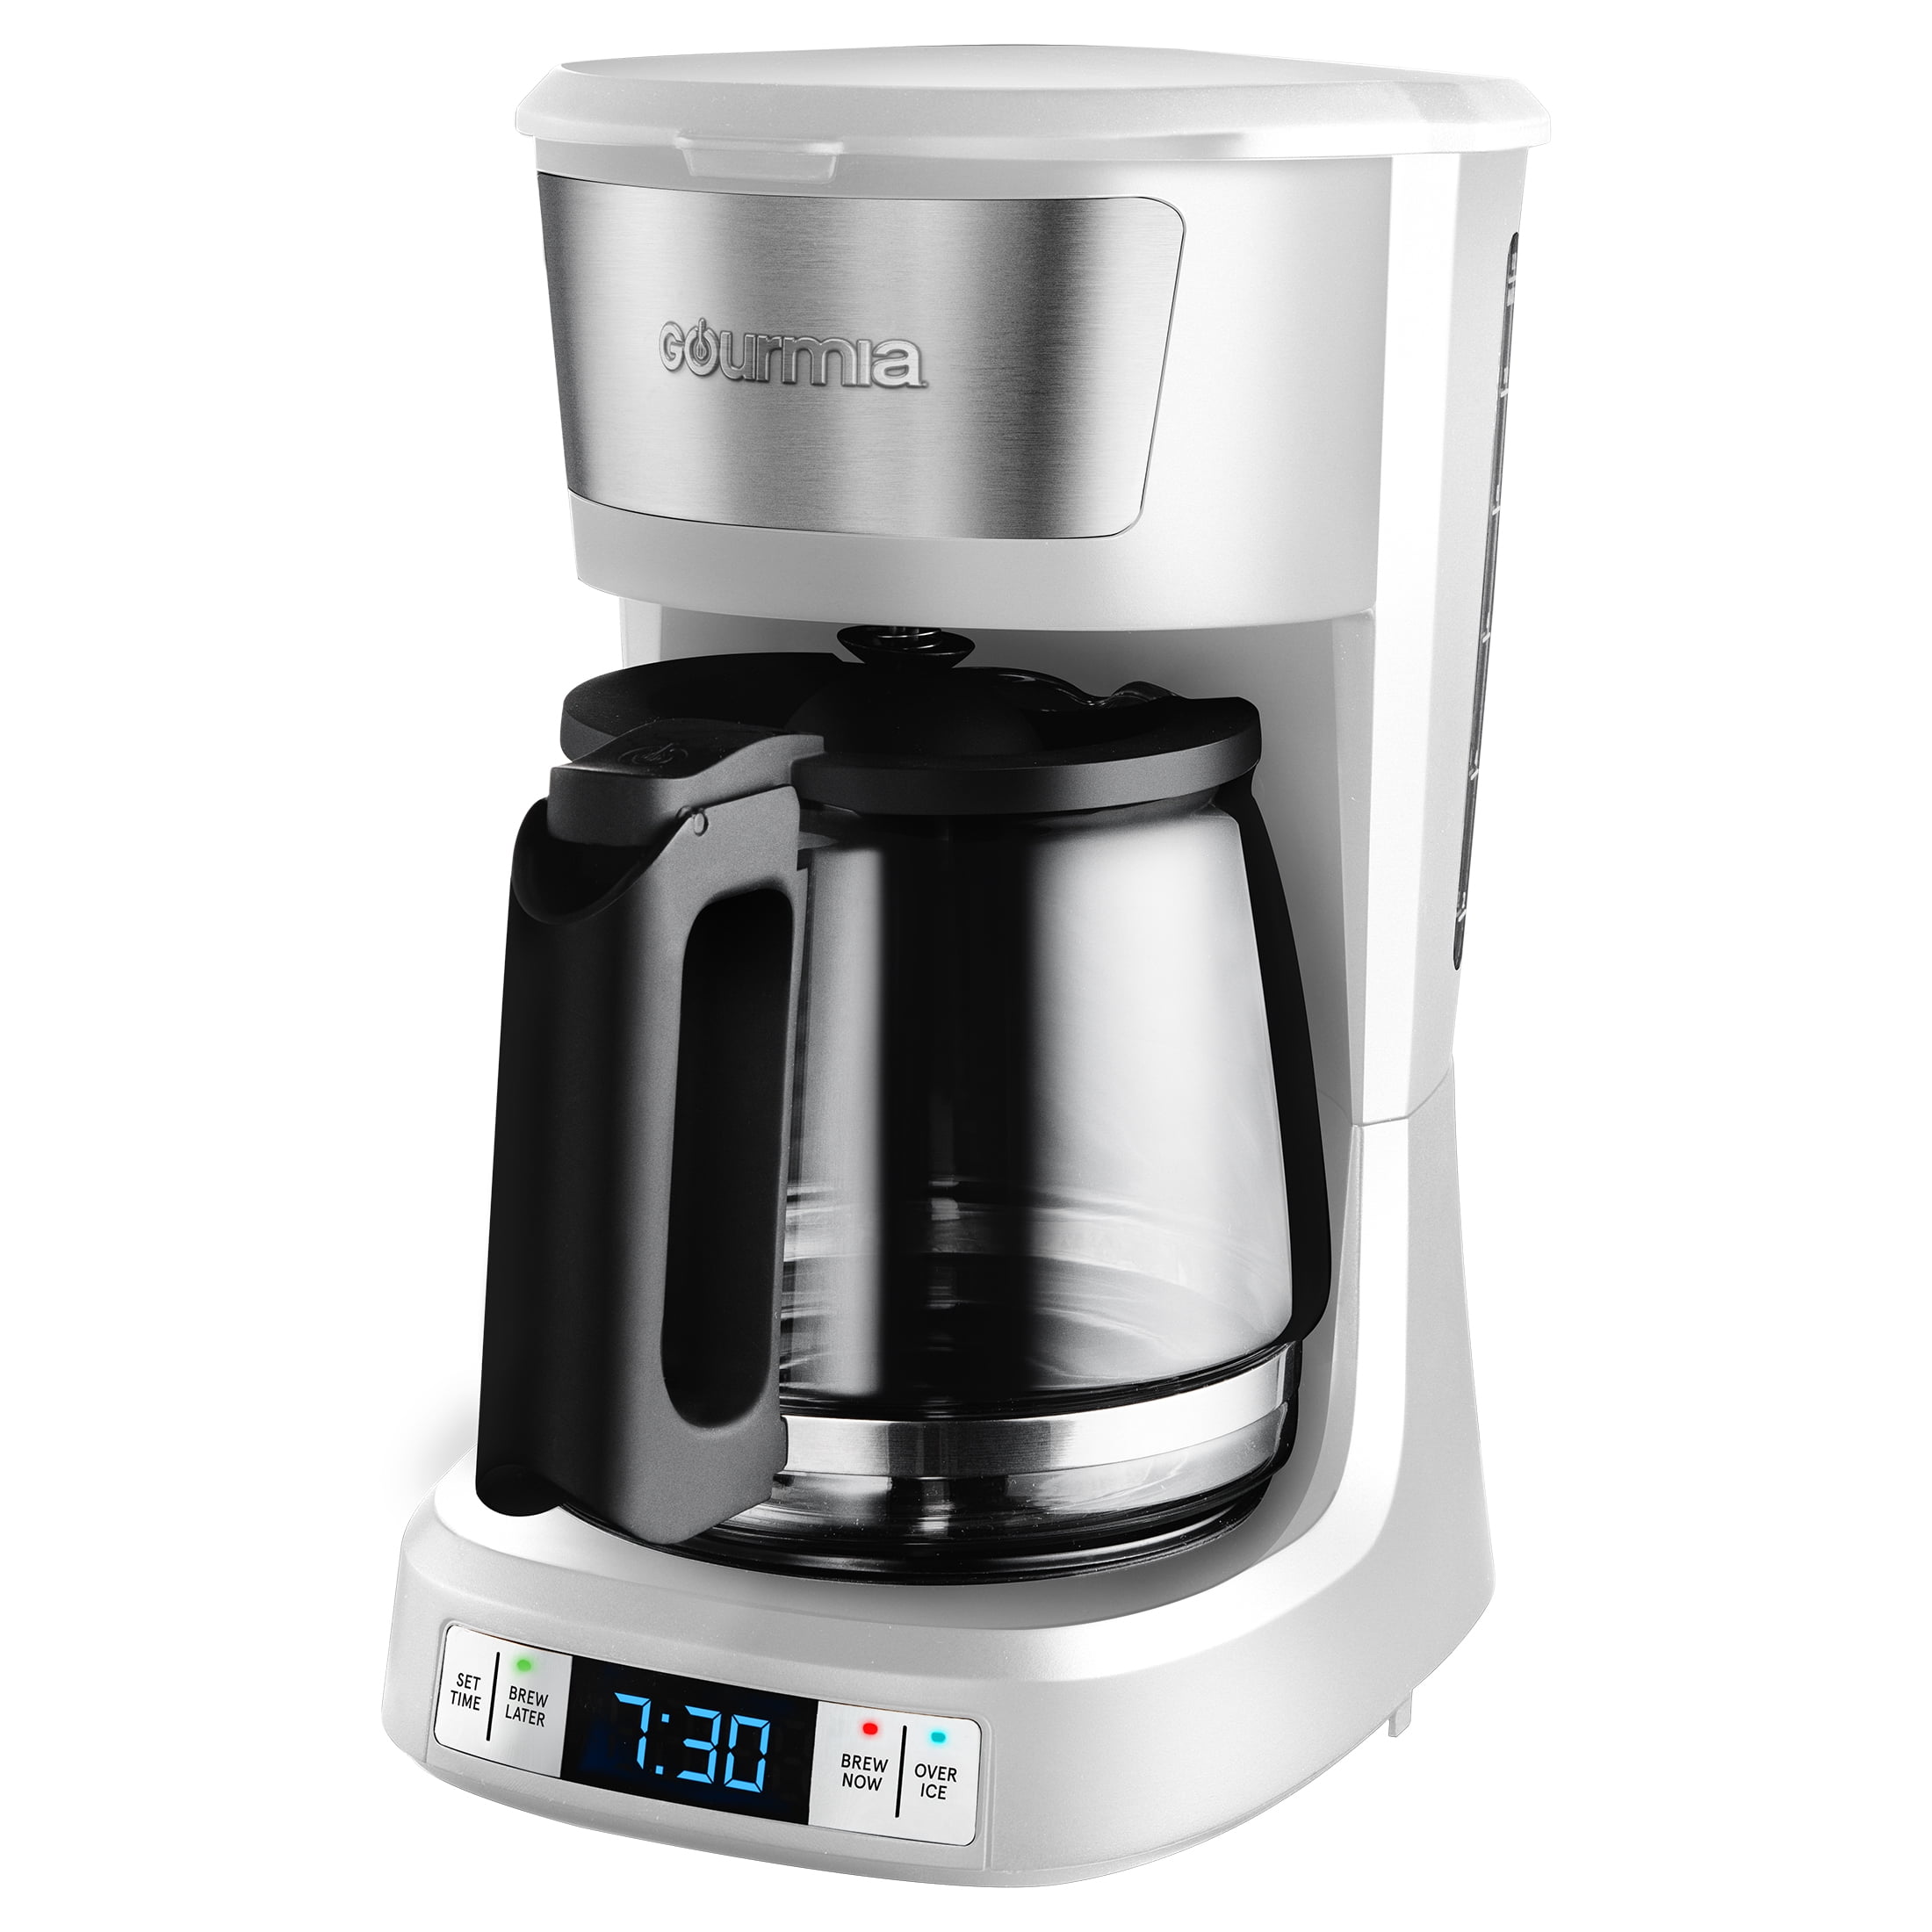 Coffee Machine, Gourmia GCM3260 Programmable Hot and Iced Coffee Maker with  Brew Strength Control, Adjustable Keep Warm with Freshness Indicator, and  Self-Clean Cycle